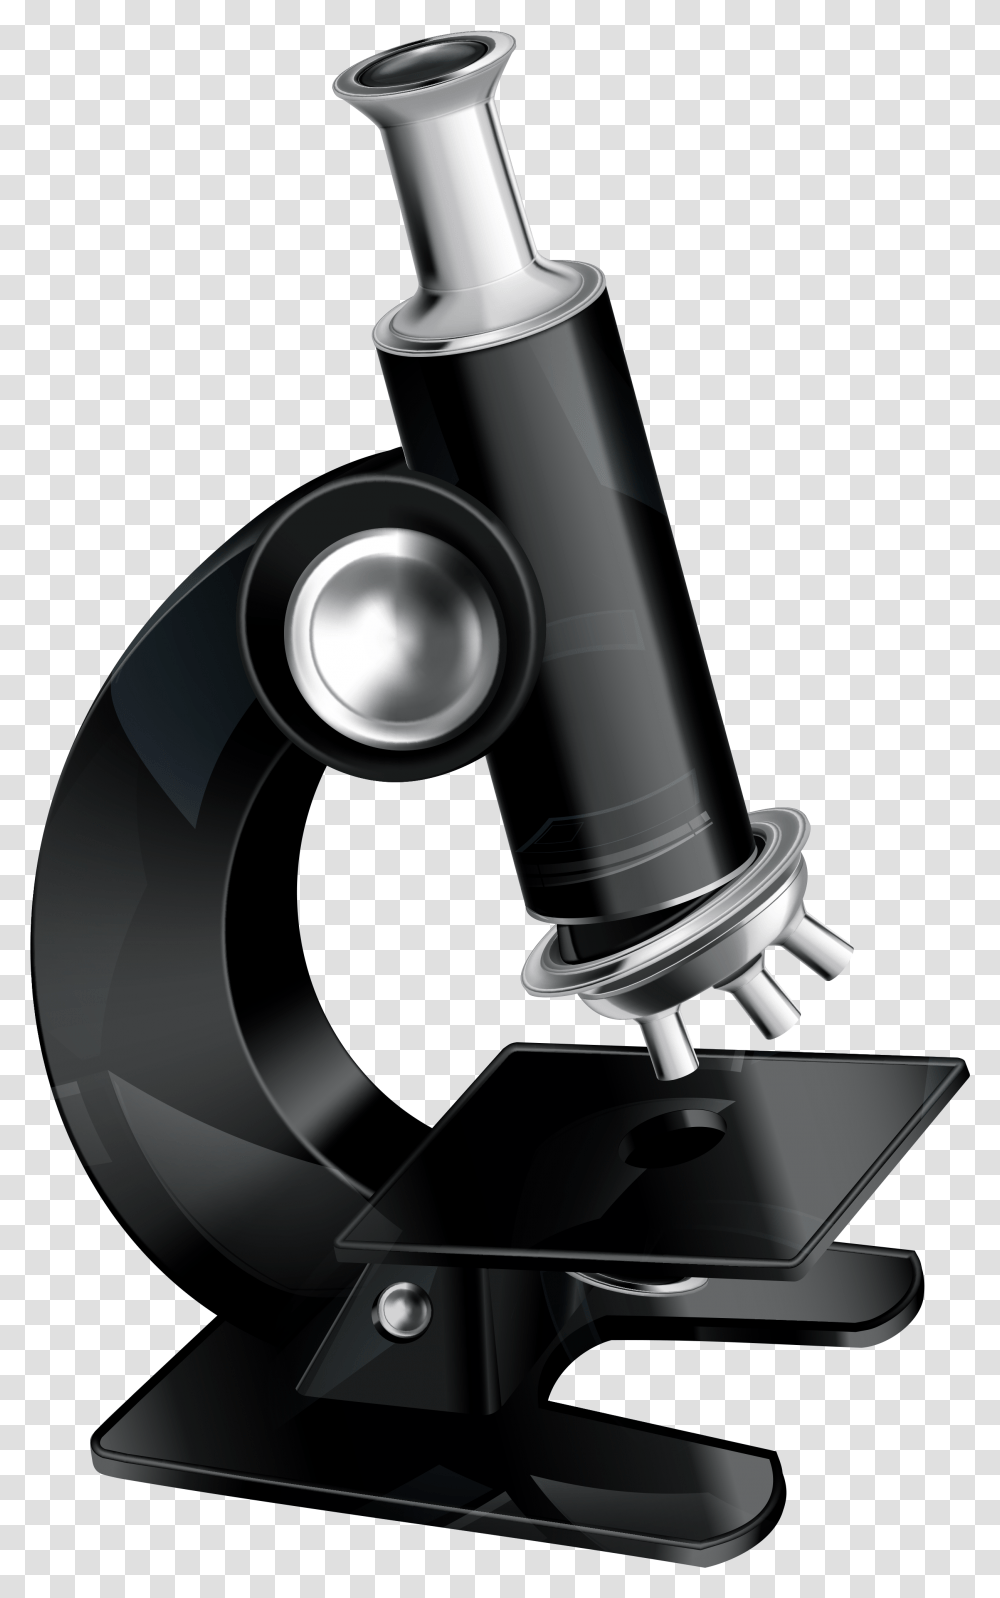 Download And Use Microscope Image Microscope, Sink Faucet, Electronics Transparent Png